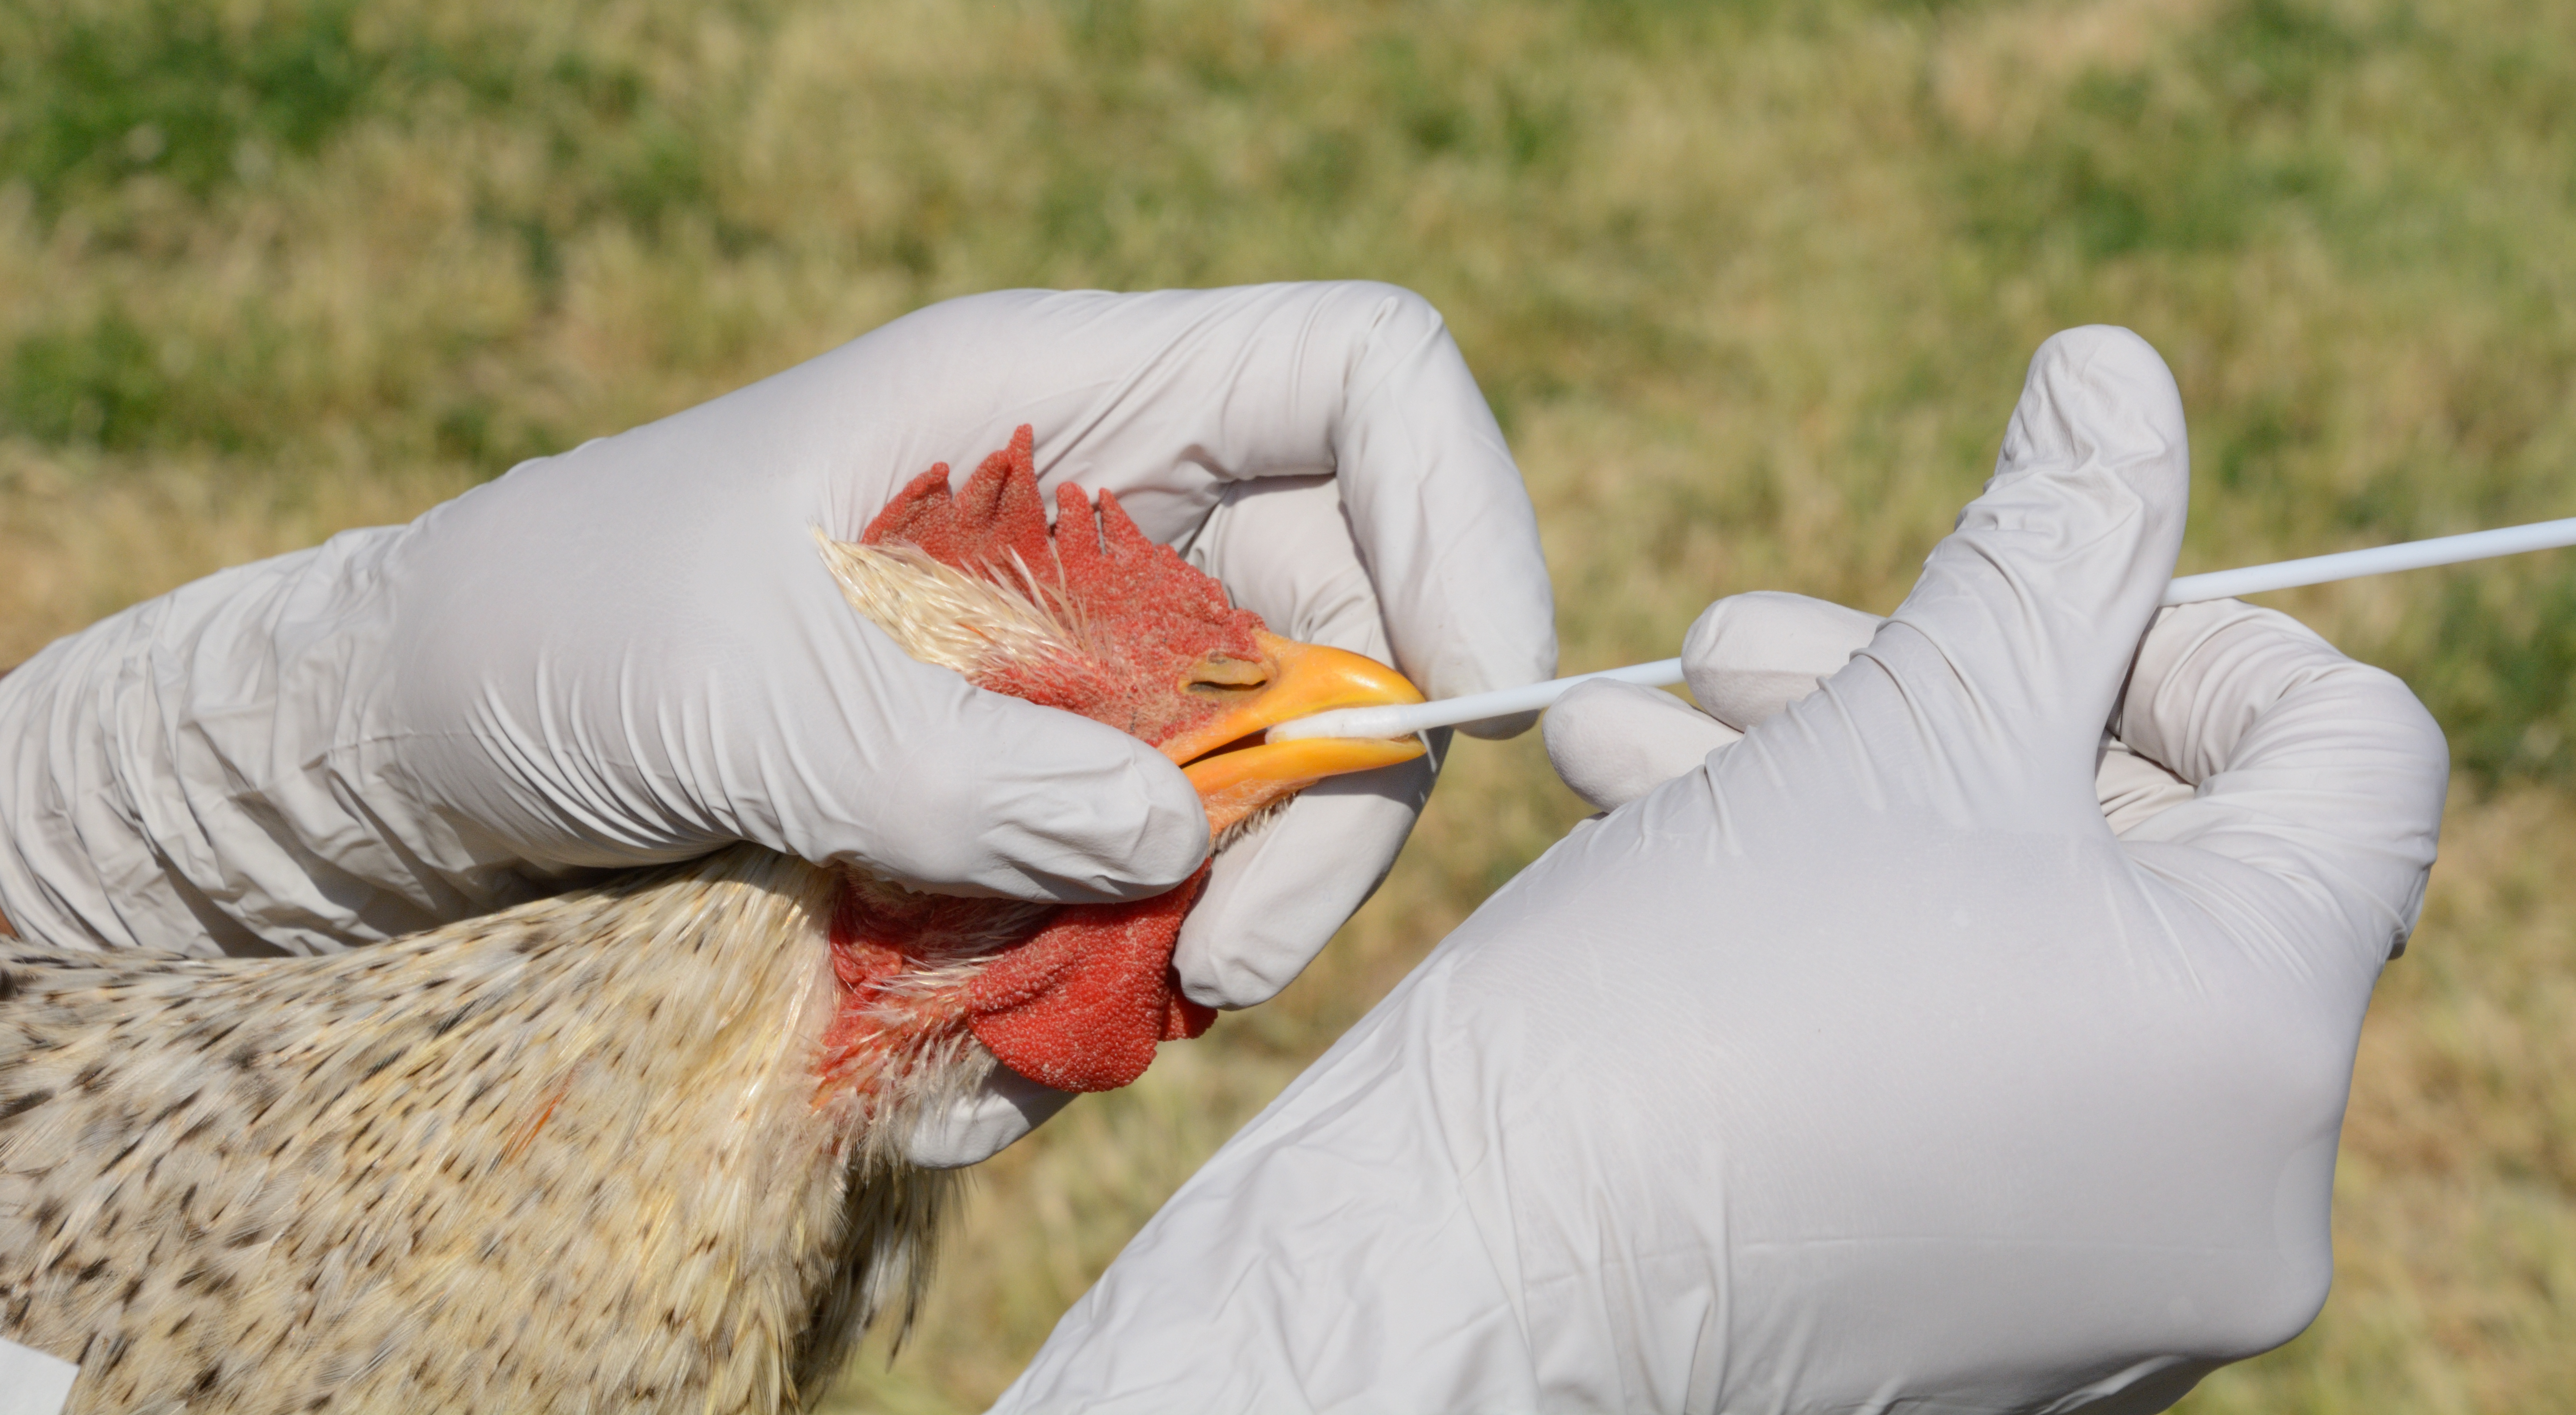 The CDC warns public health orgs:  Keep an eye on spreading bird flu cases, but don't freak out -- yet